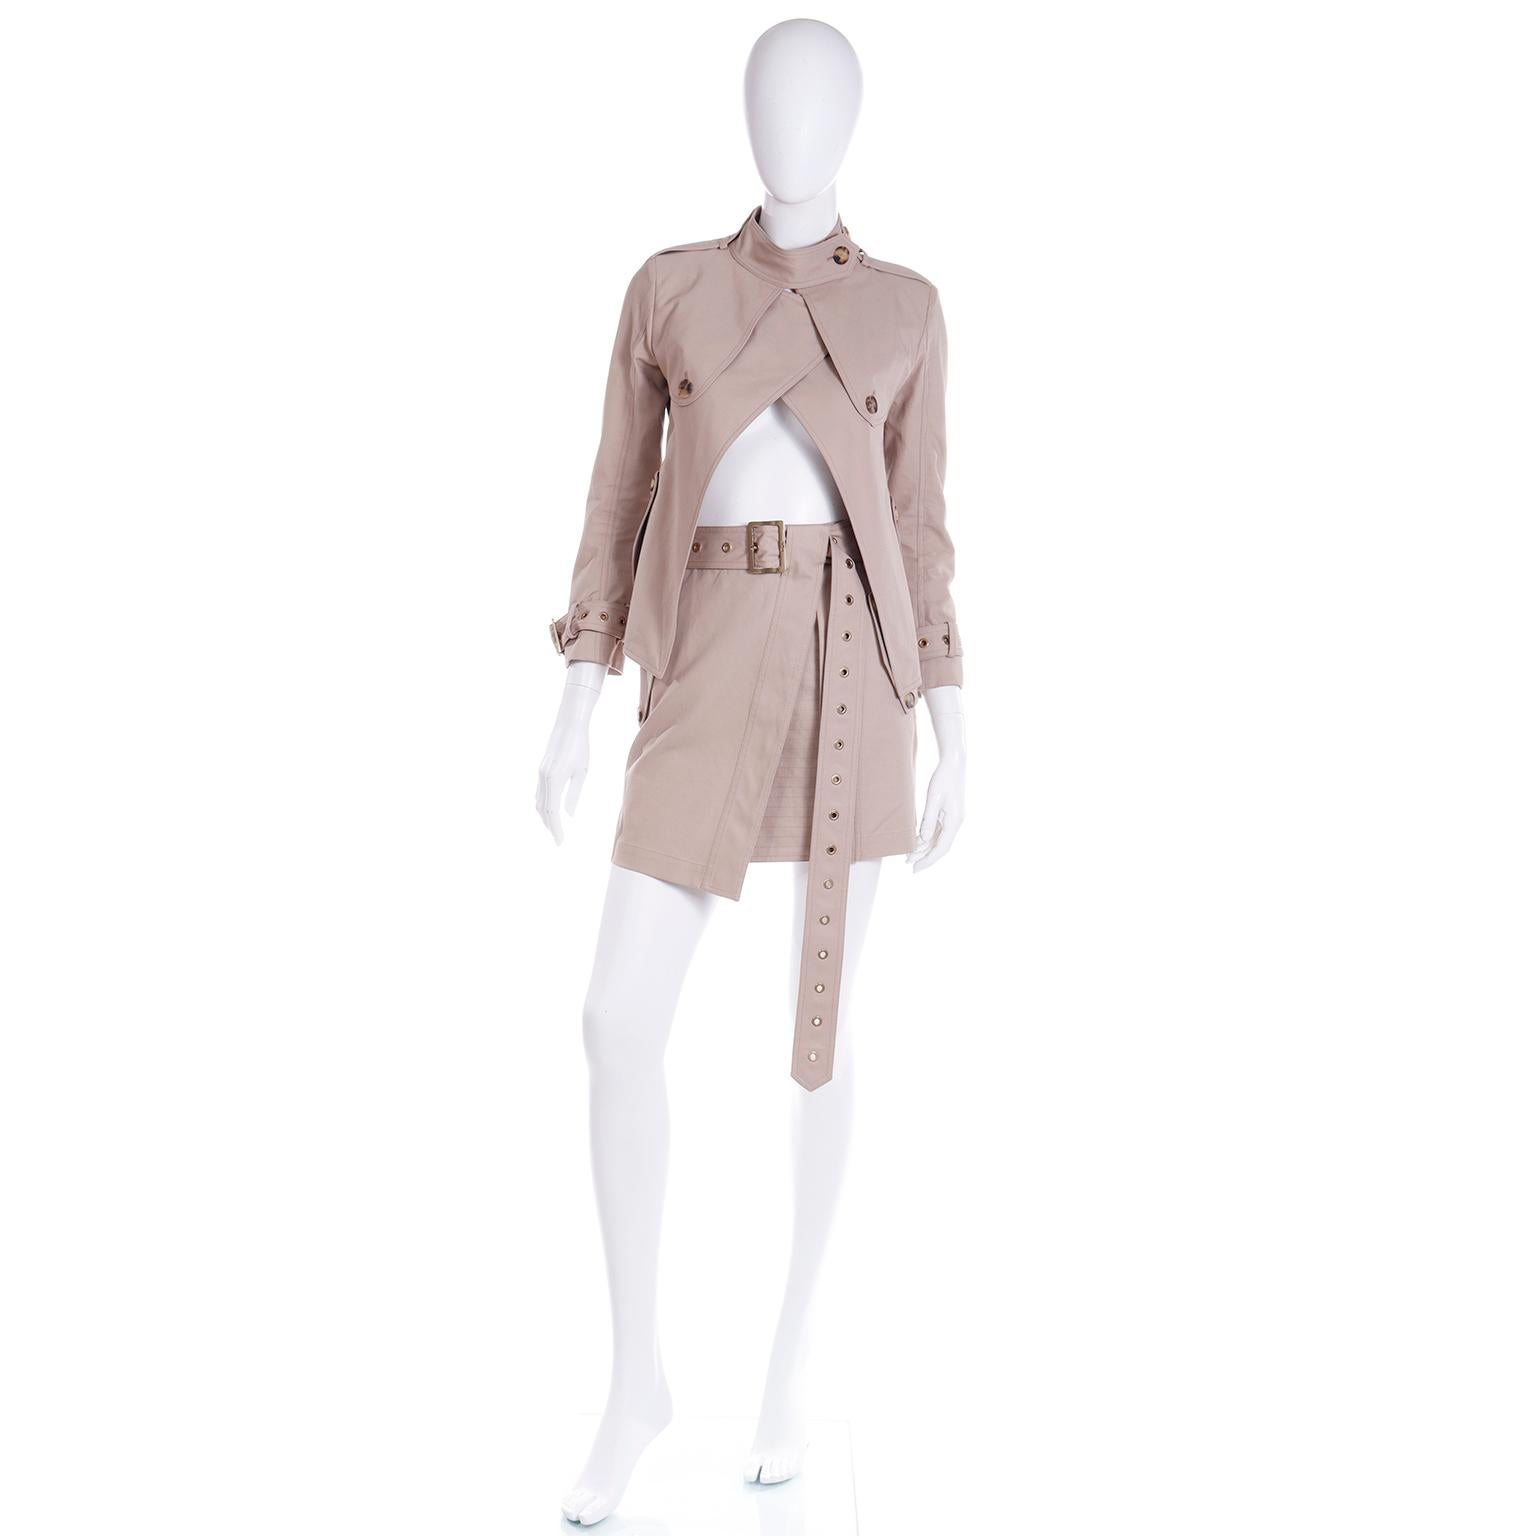 This unique vintage tan cotton outfit from Salvatore Ferragamo includes a cropped trench coat style jacket, a mini skirt and a long notched fabric belt with a Ferragamo branded buckle. The tan cotton fabric is so luxe and there is supple leather